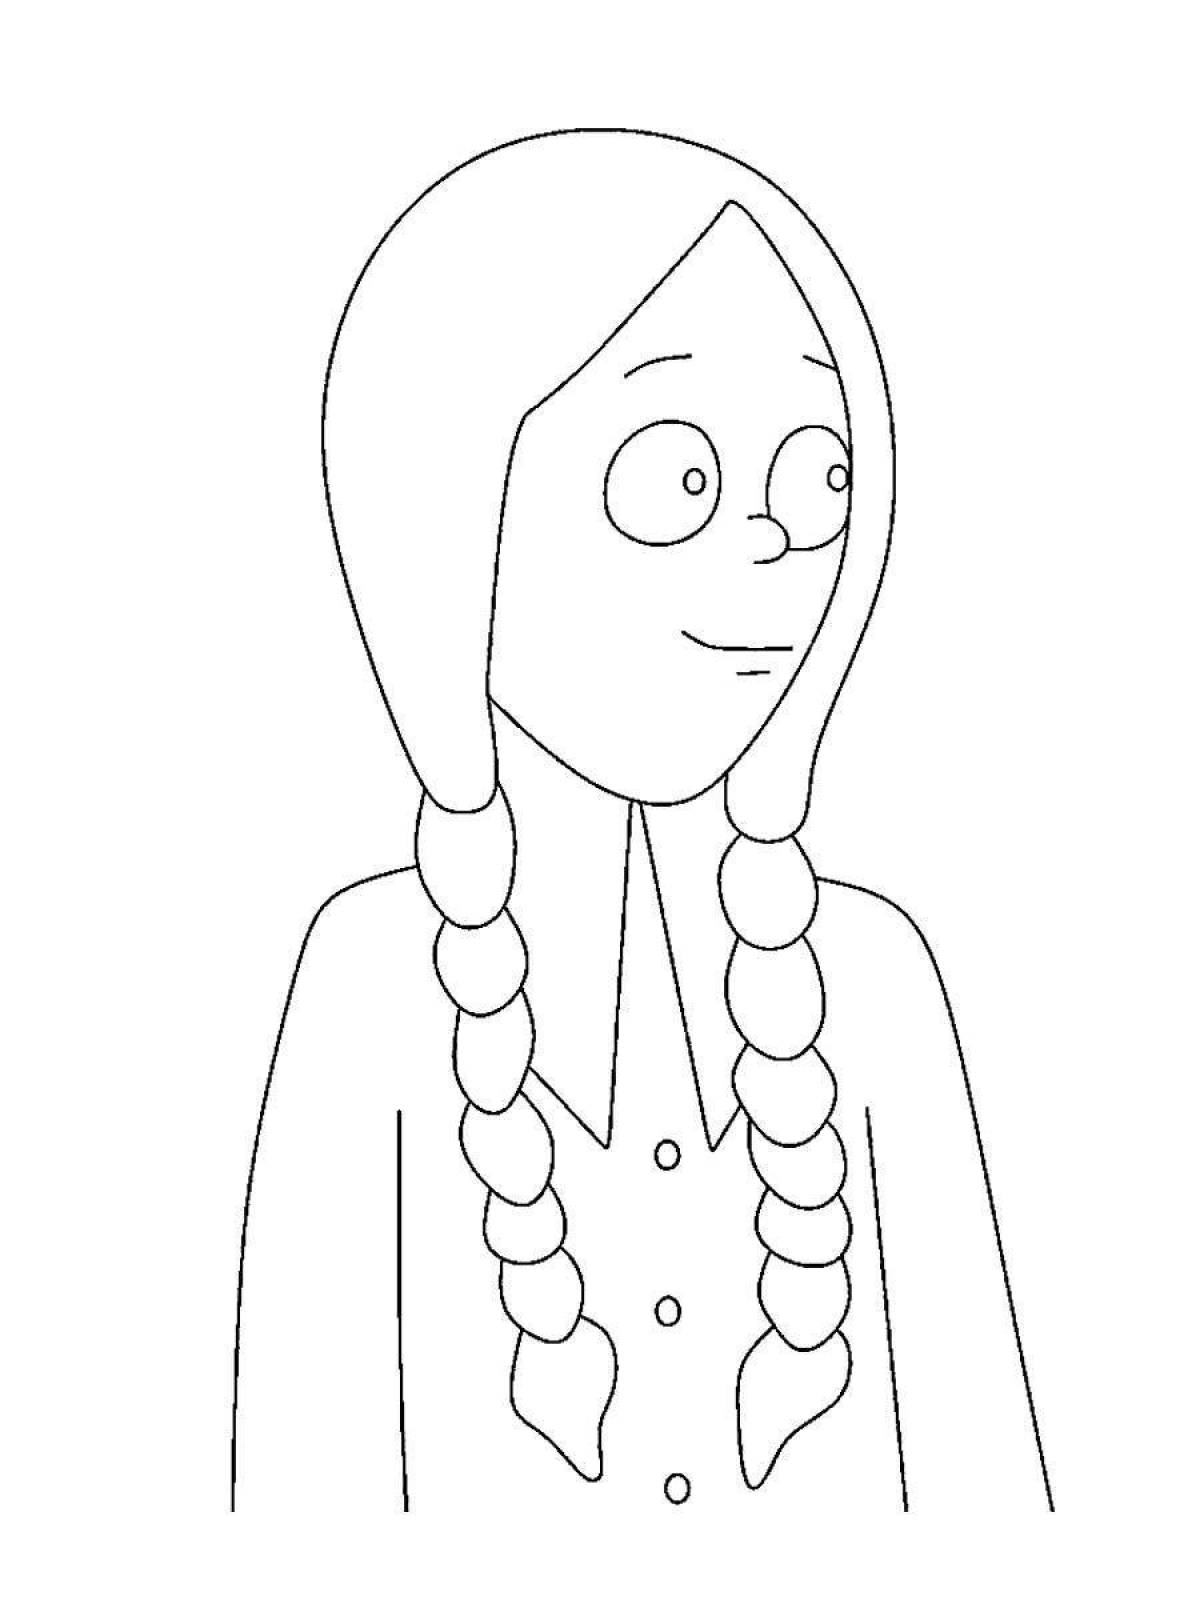 Addams freaky environment coloring page